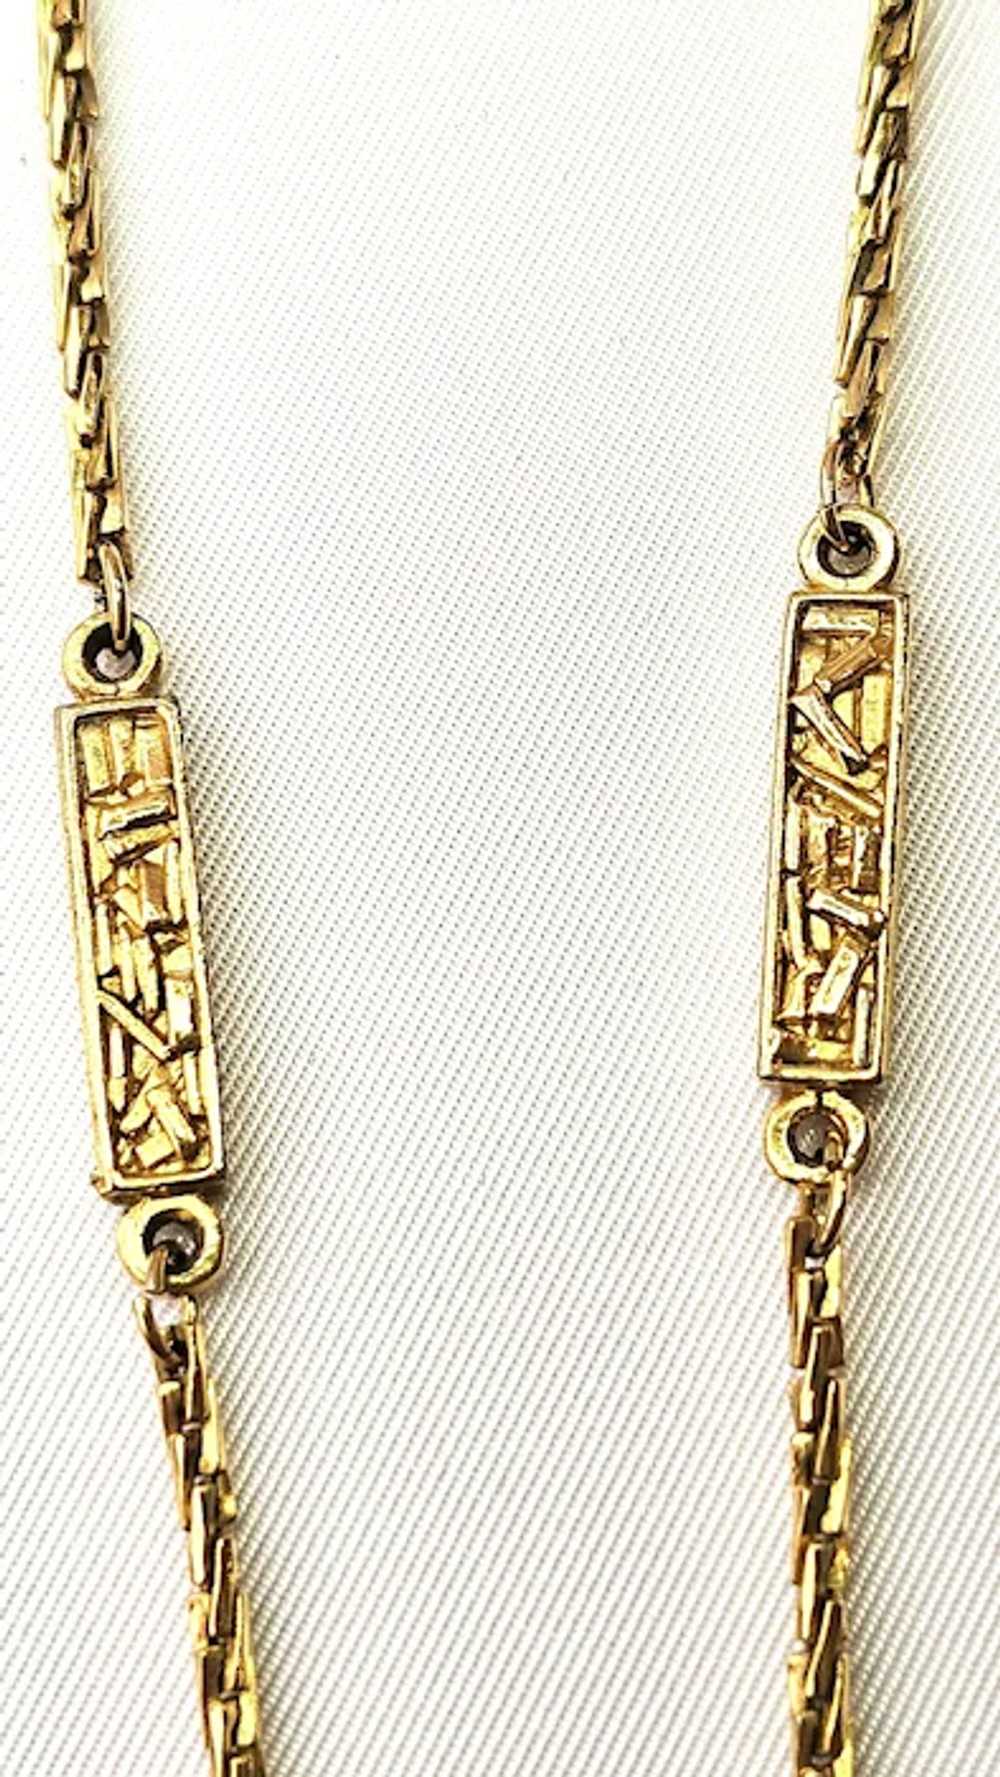 Vintage Trifari Gold-Tone Metal Sections Necklace - image 6